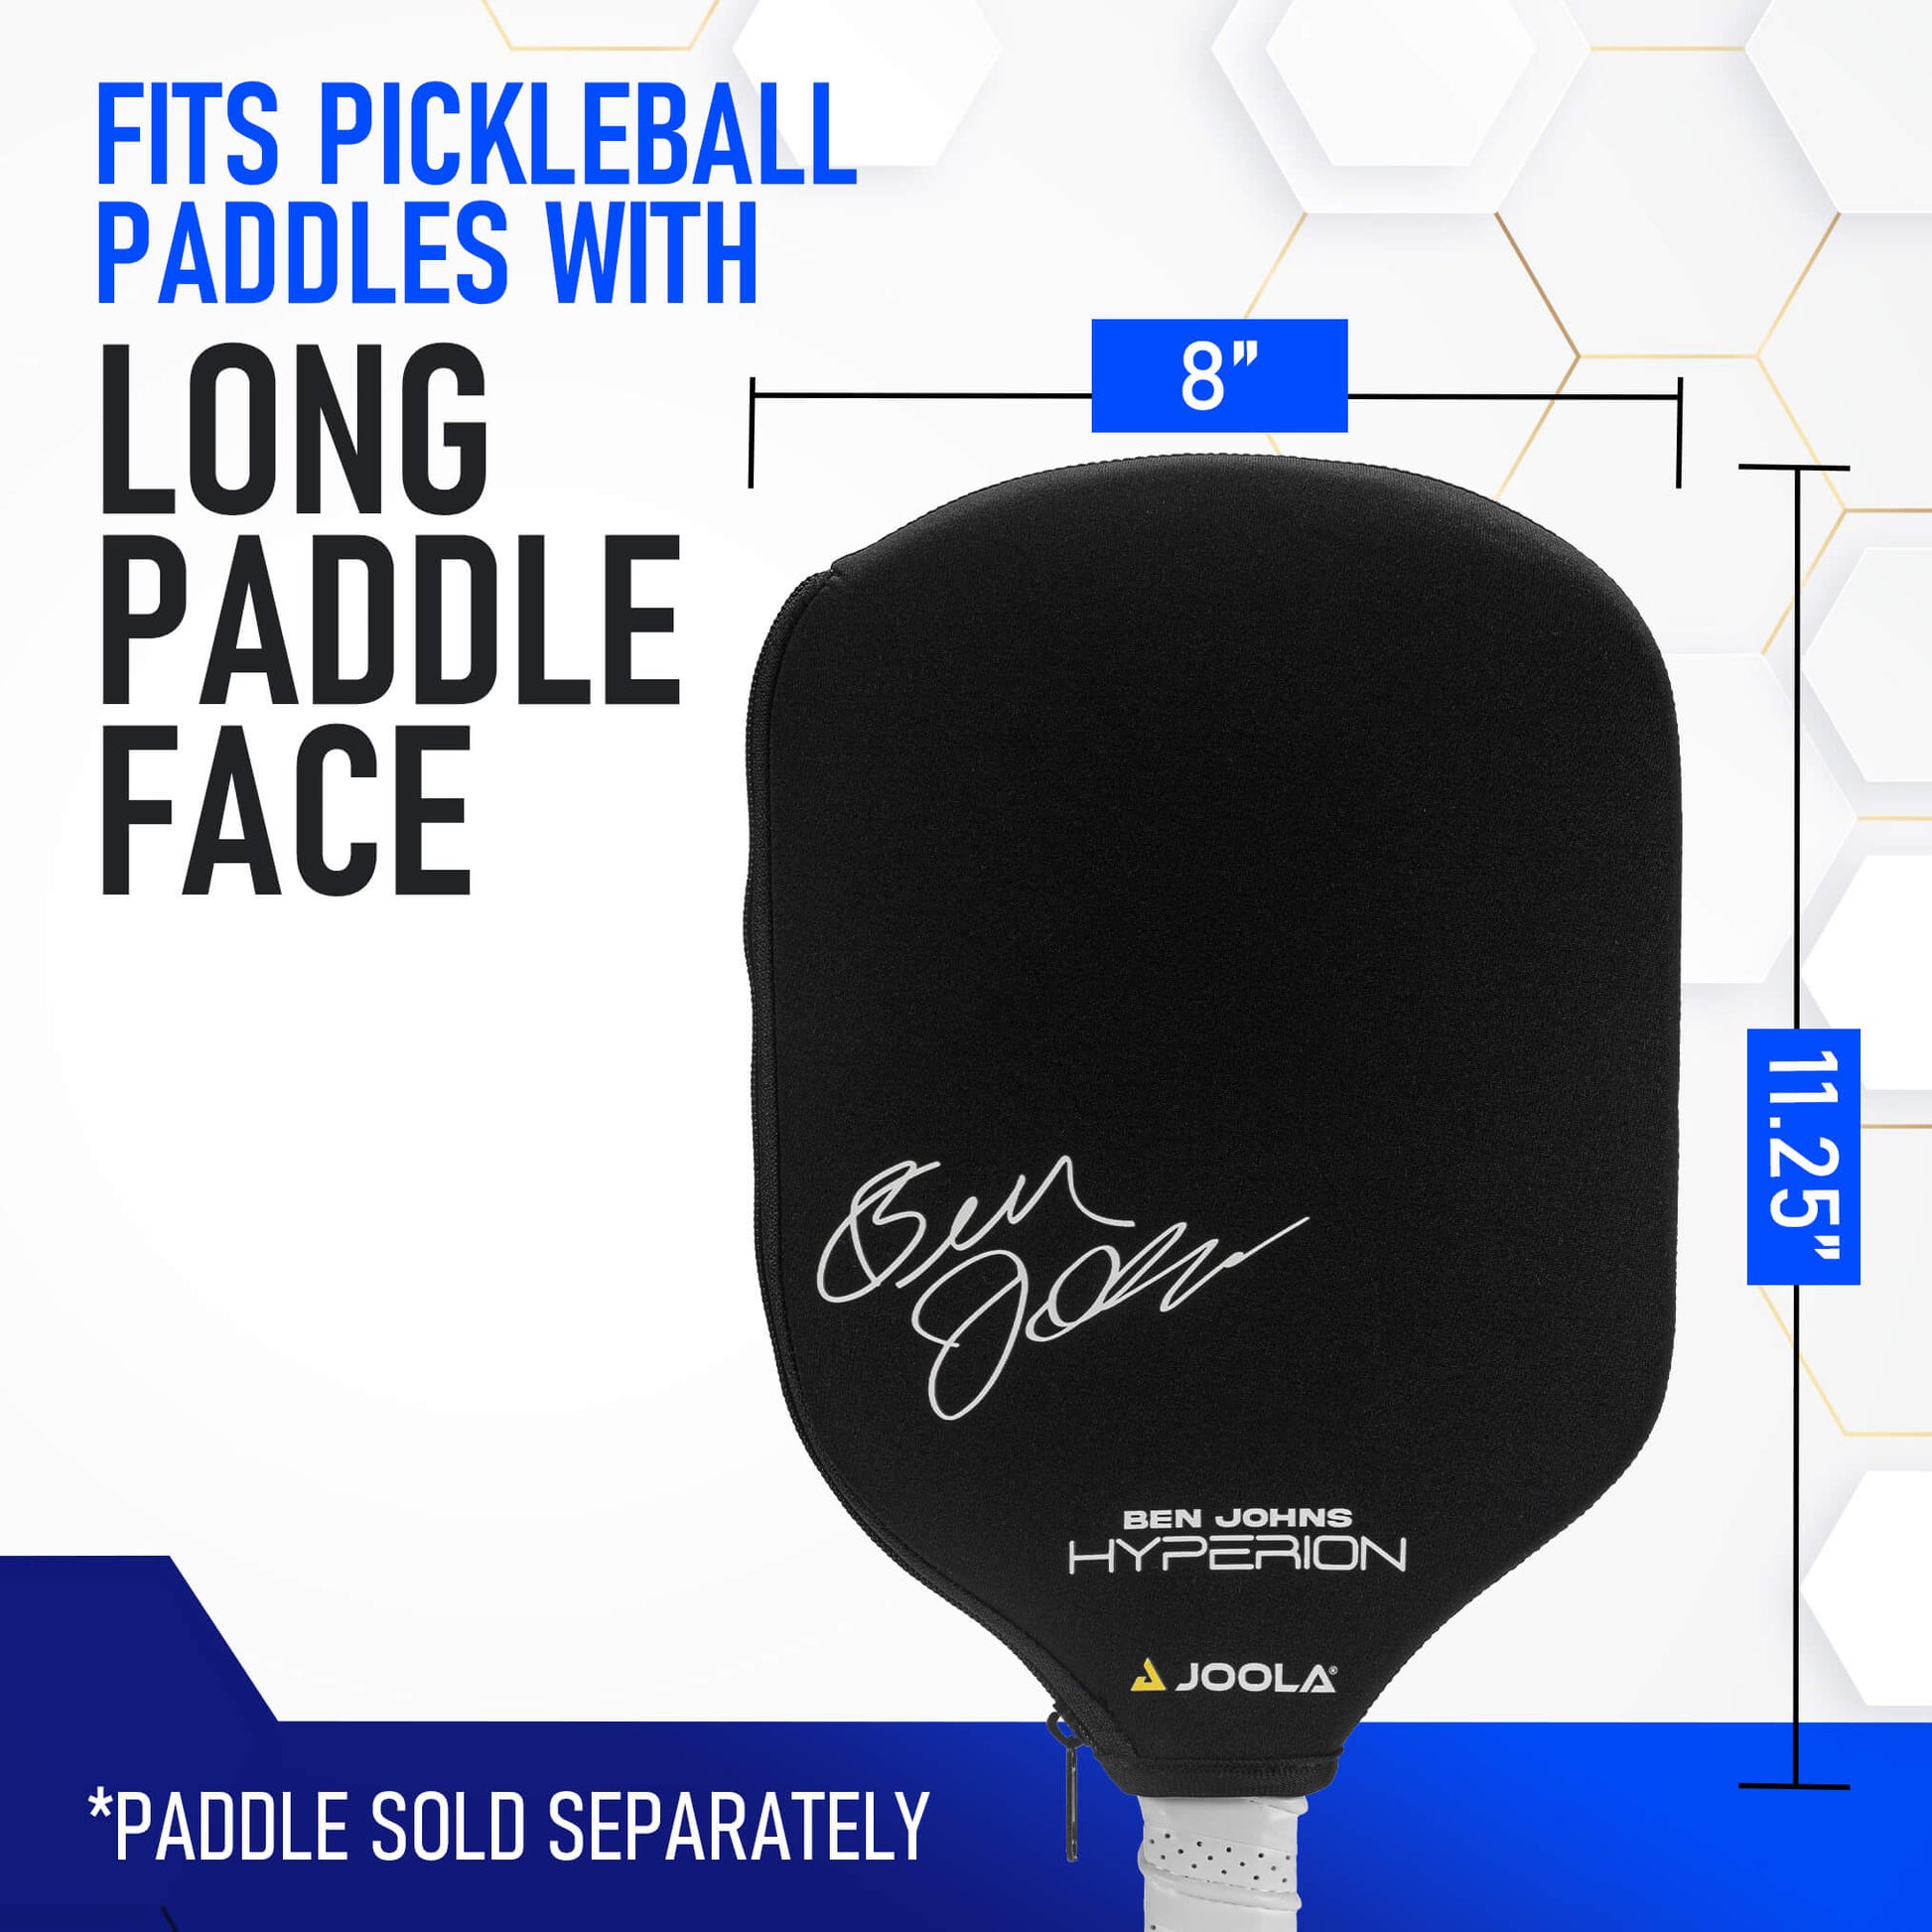 A picture of a JOOLA paddle with the words "fit JOOLA Elongated Neoprene Sleeve Pickleball Paddle Cover" with long paddle face.